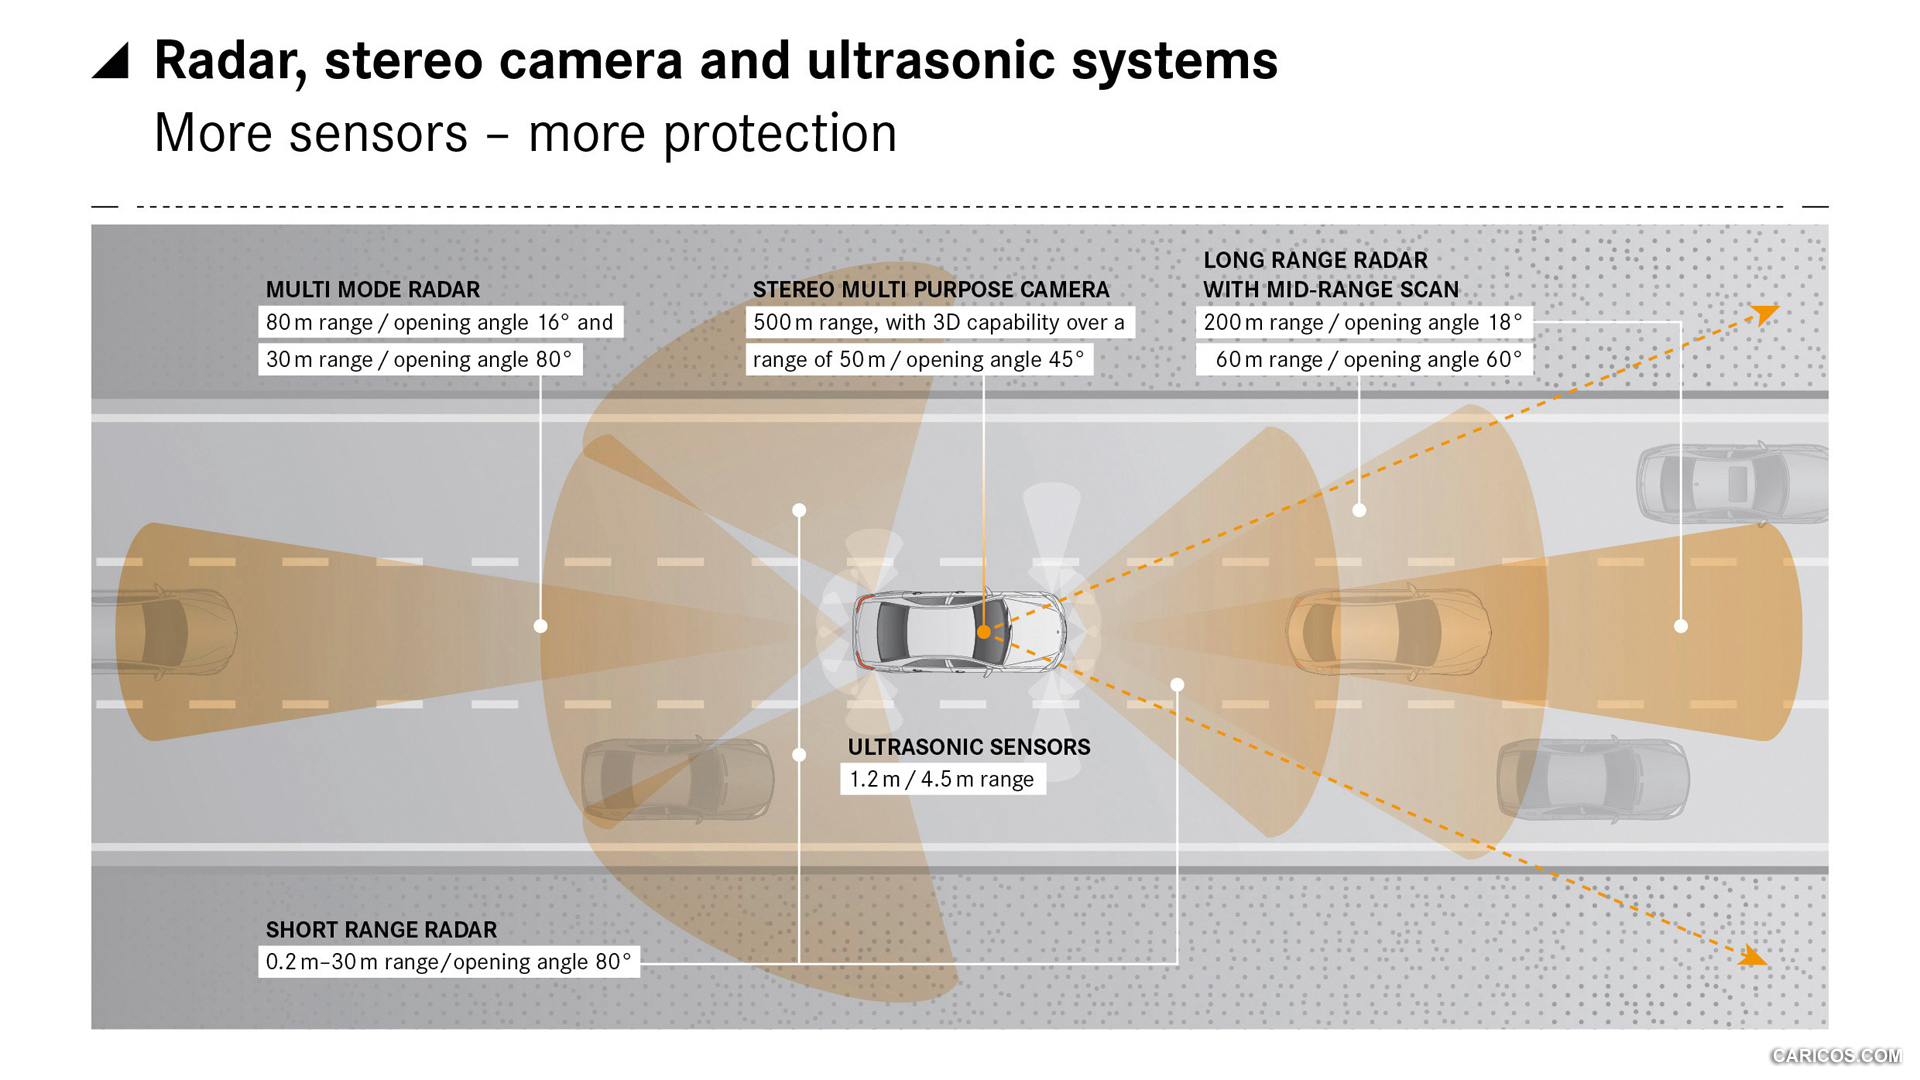 2015 Mercedes-Benz C-Class Radar, Stereo Camera, and Ultrasonic Systems - Technical Drawing, #77 of 181